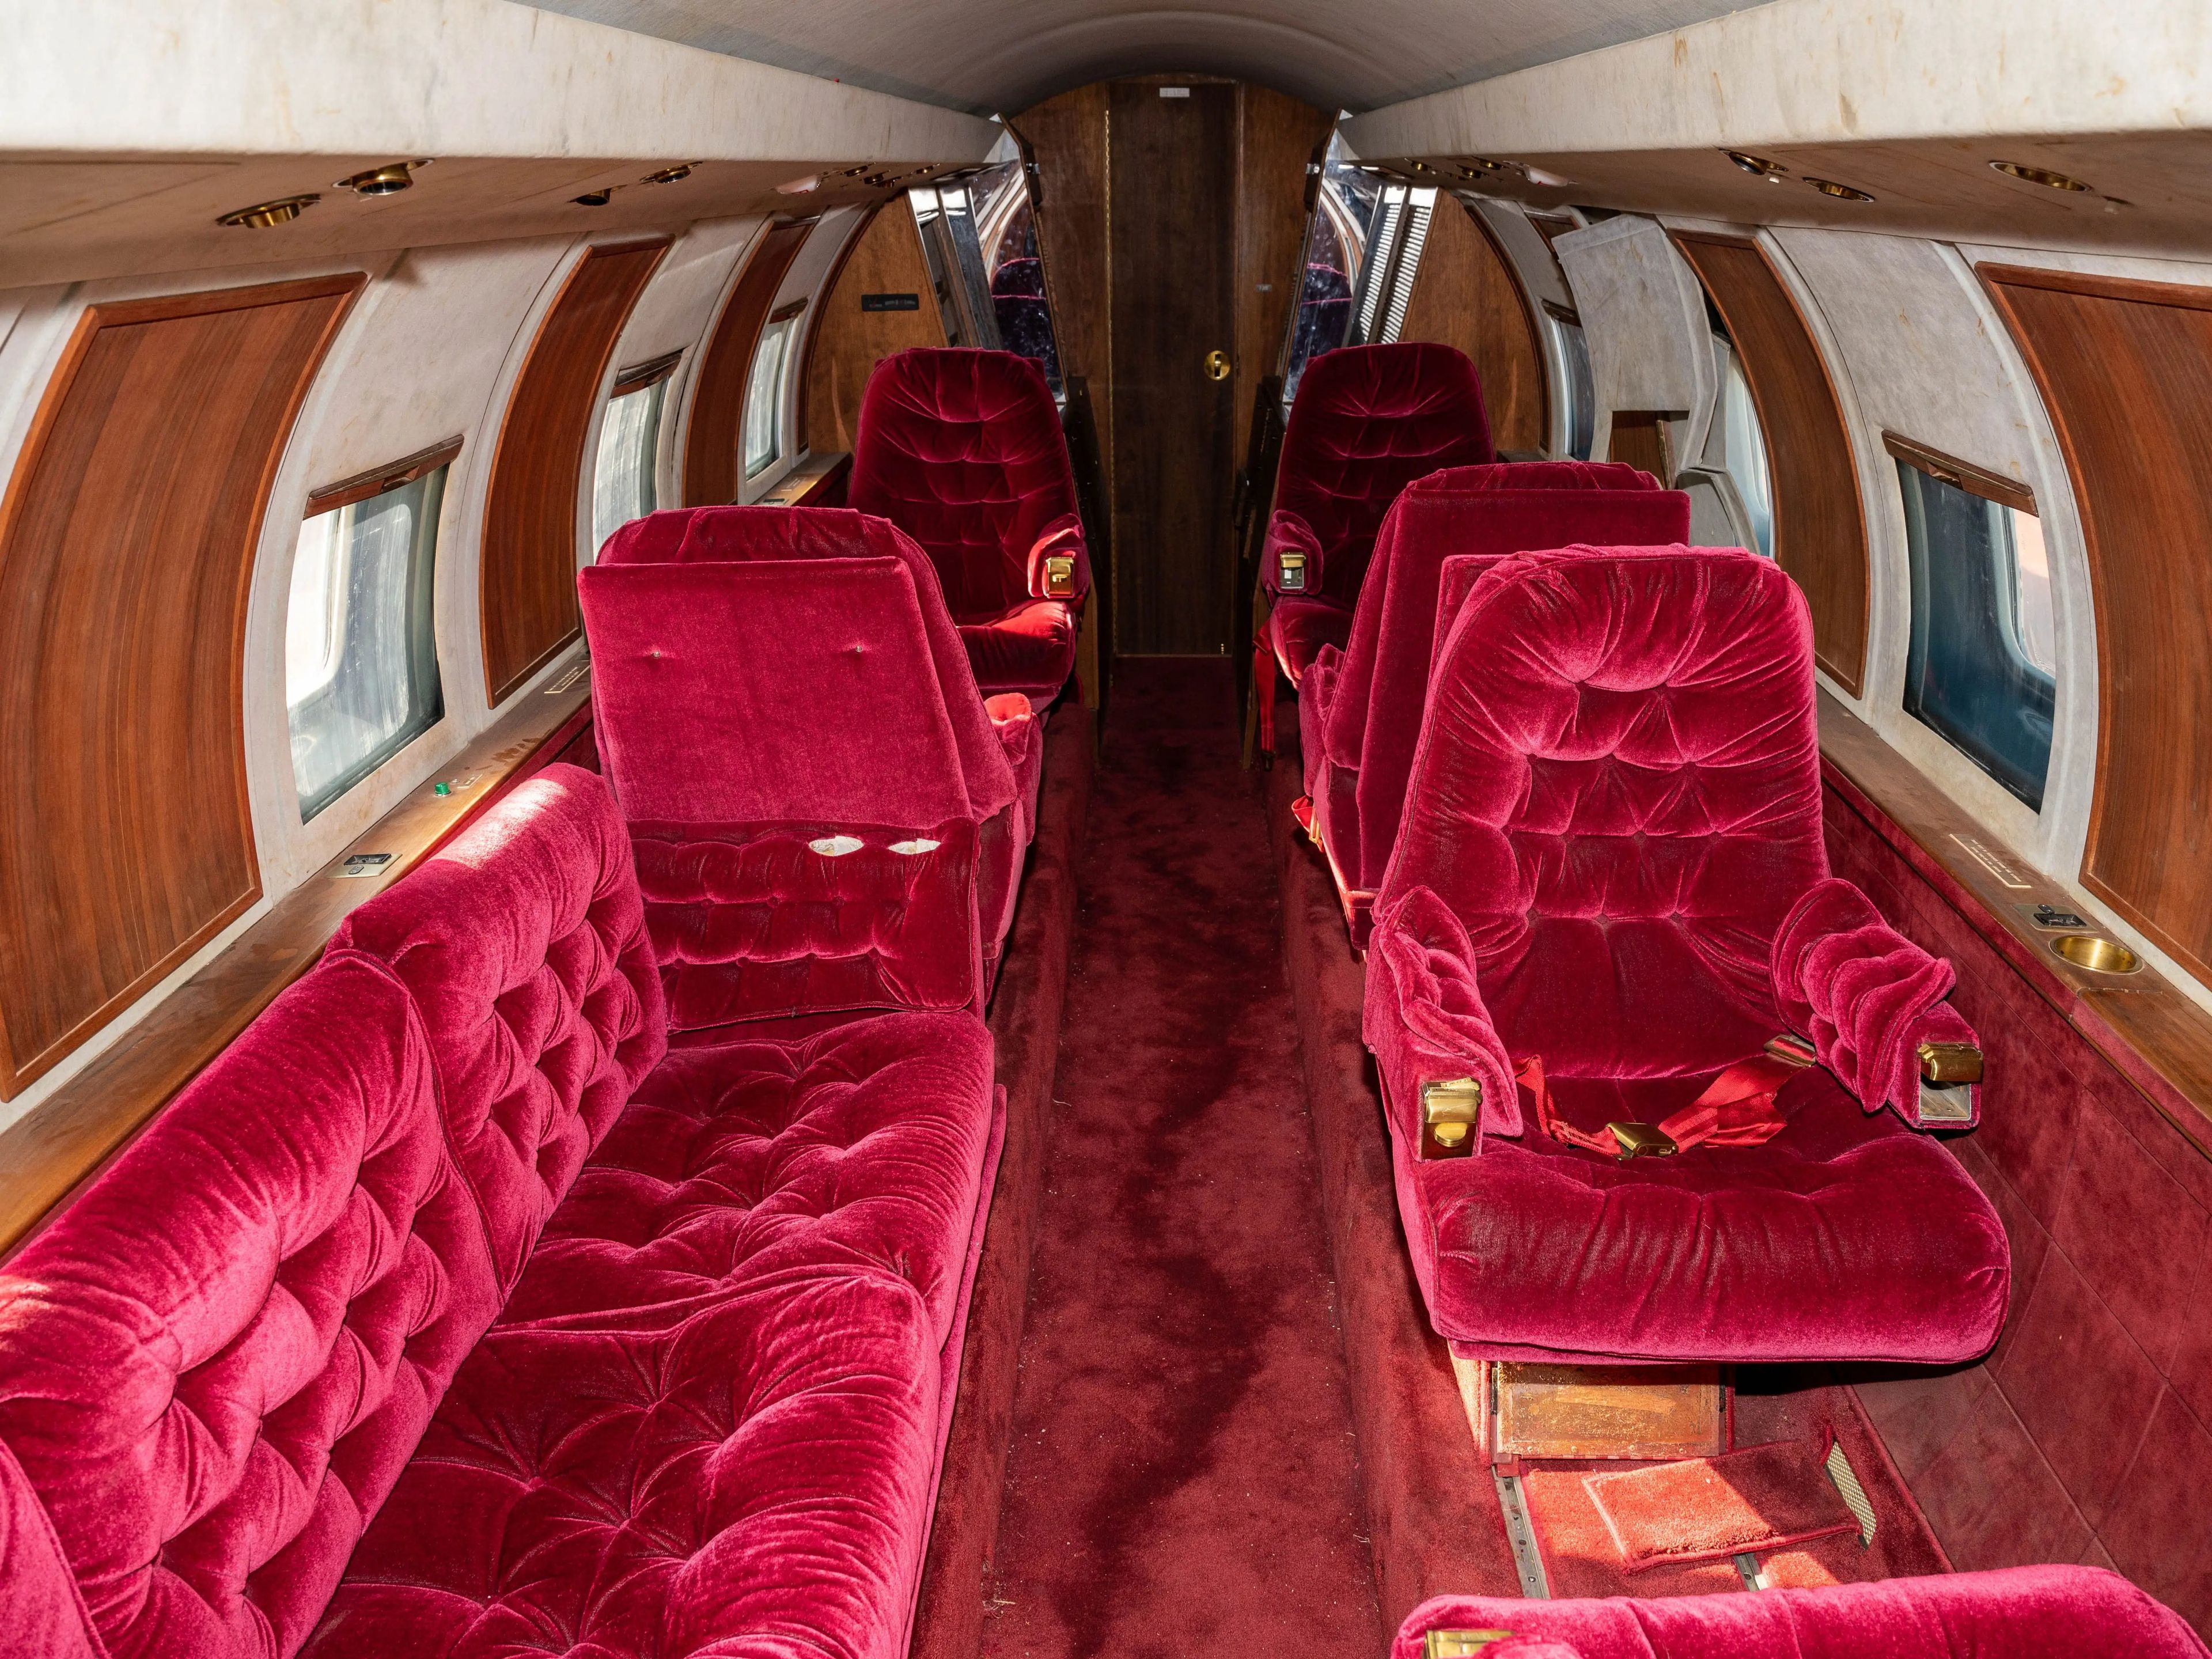 Photo of inside the jet plane which has red velvet seats